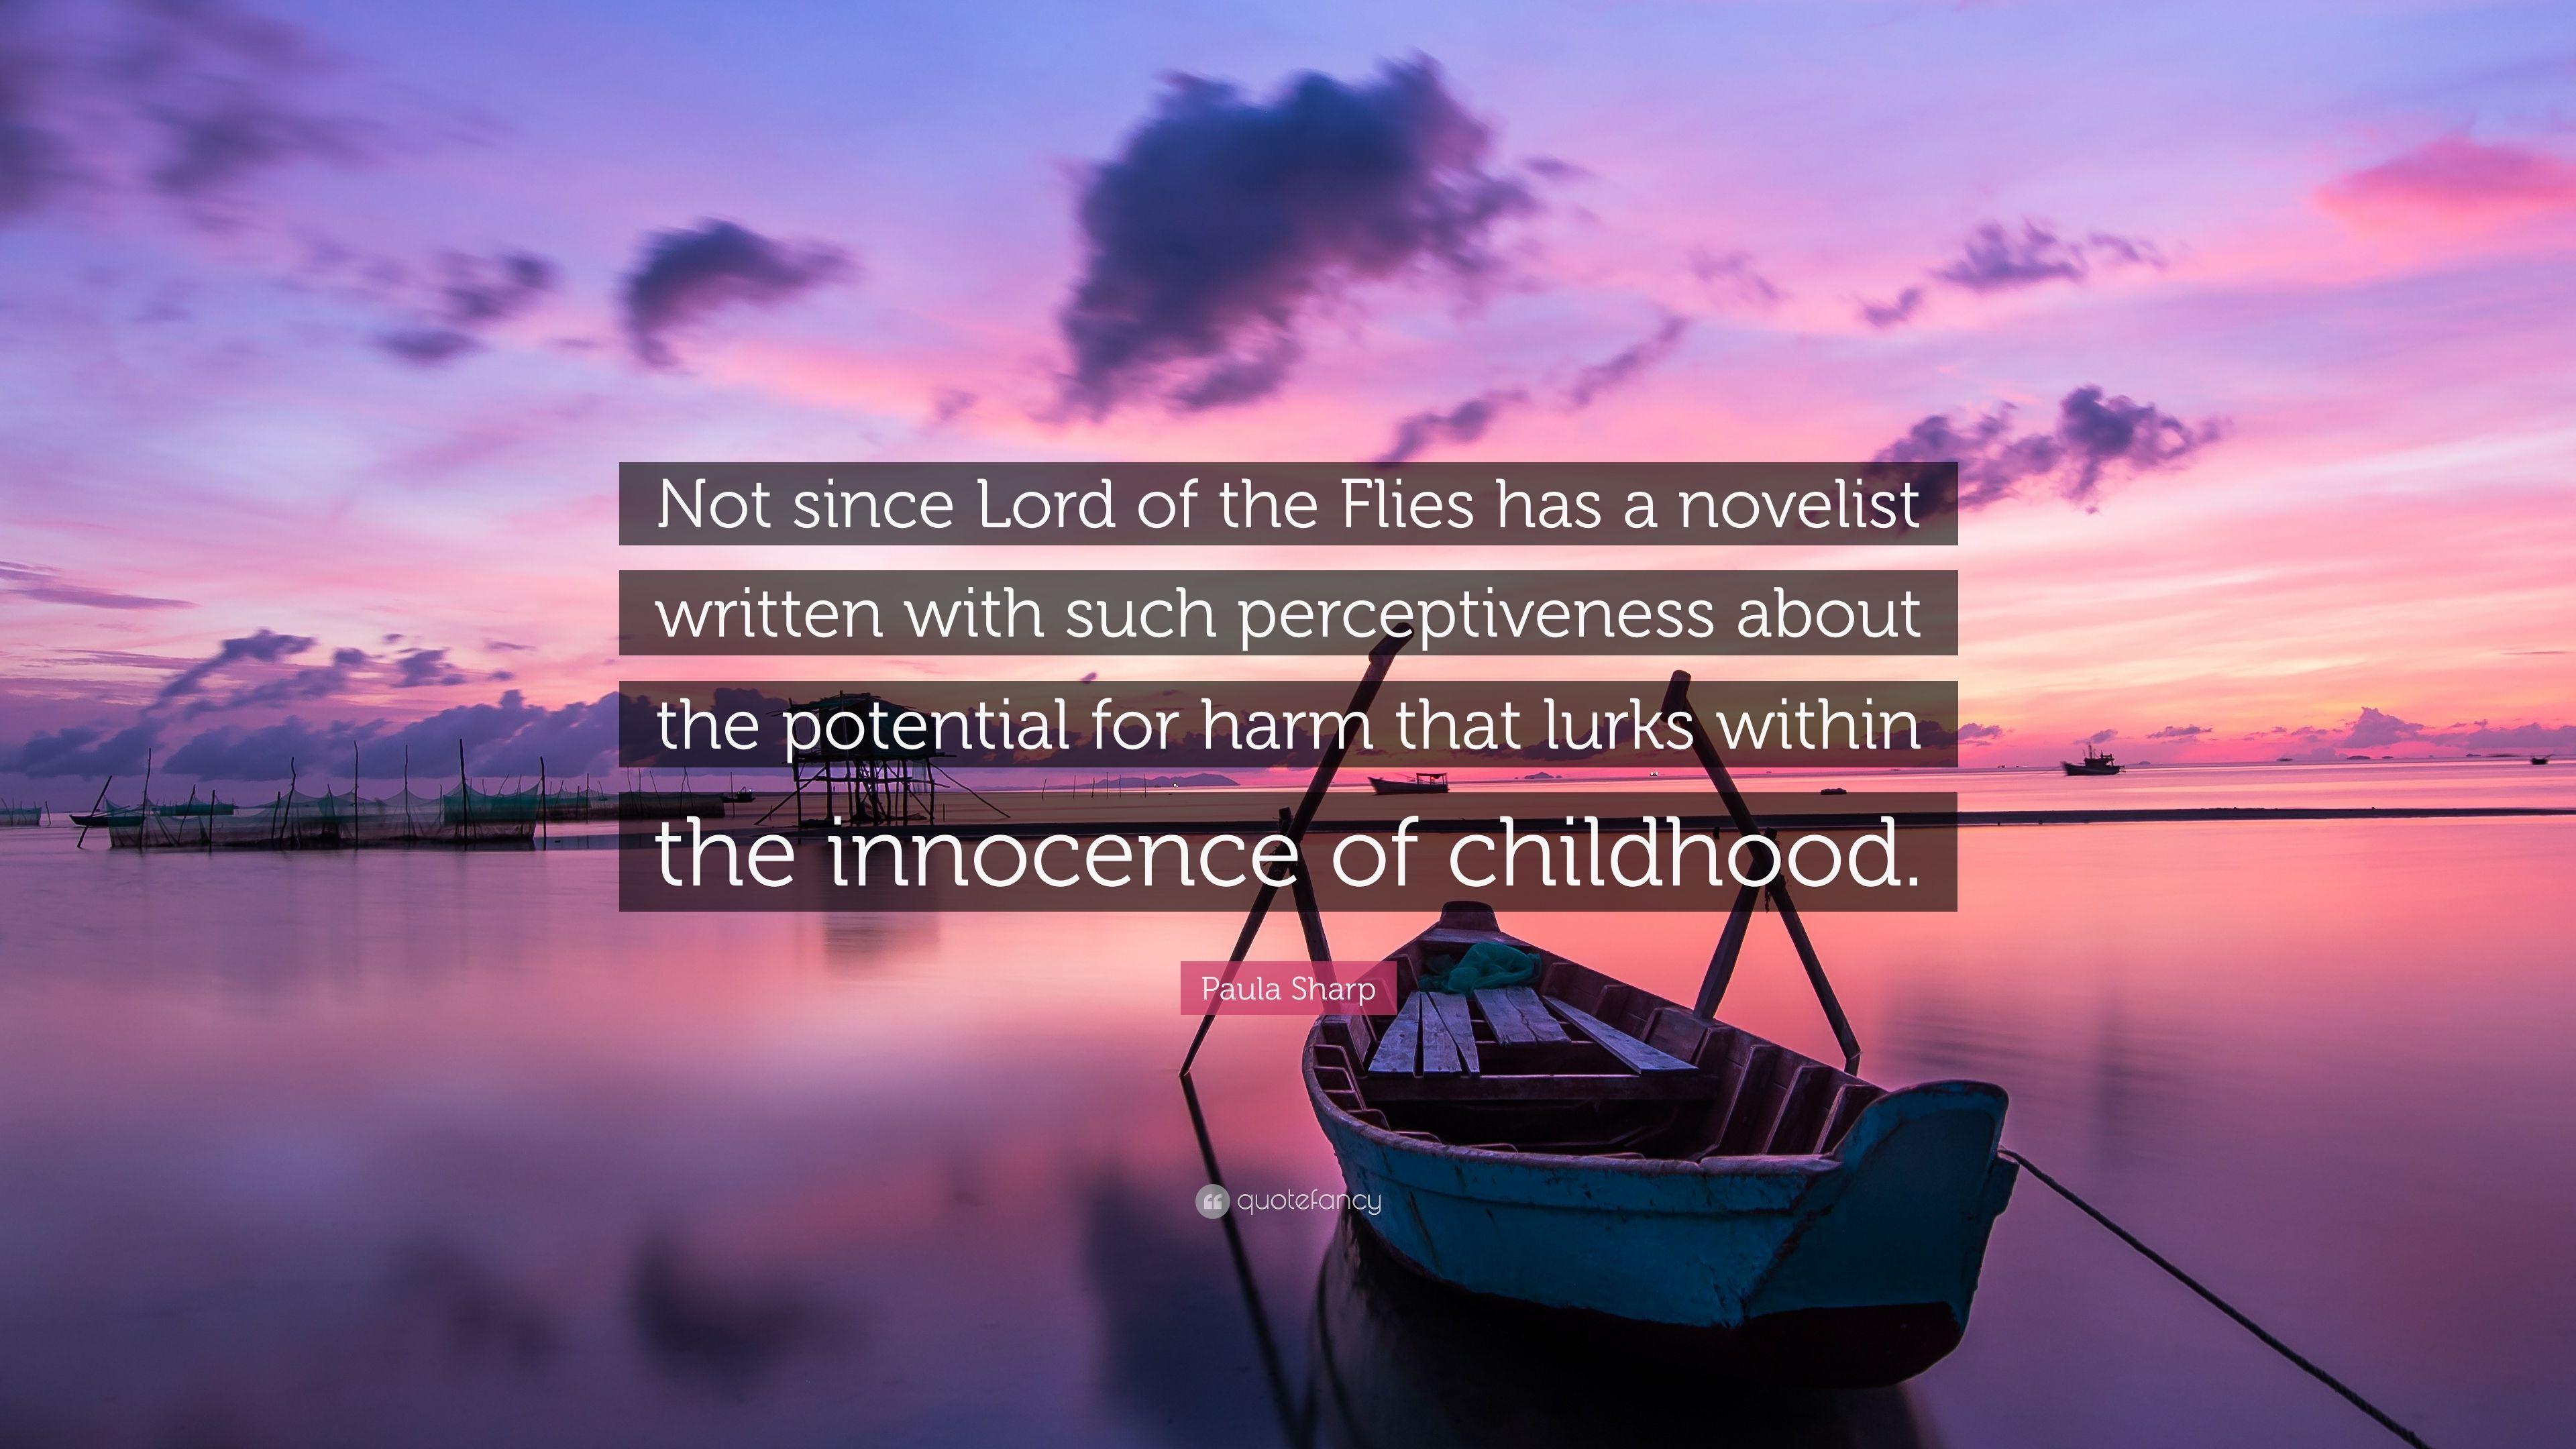 Paula Sharp Quote: “Not since Lord of the Flies has a novelist